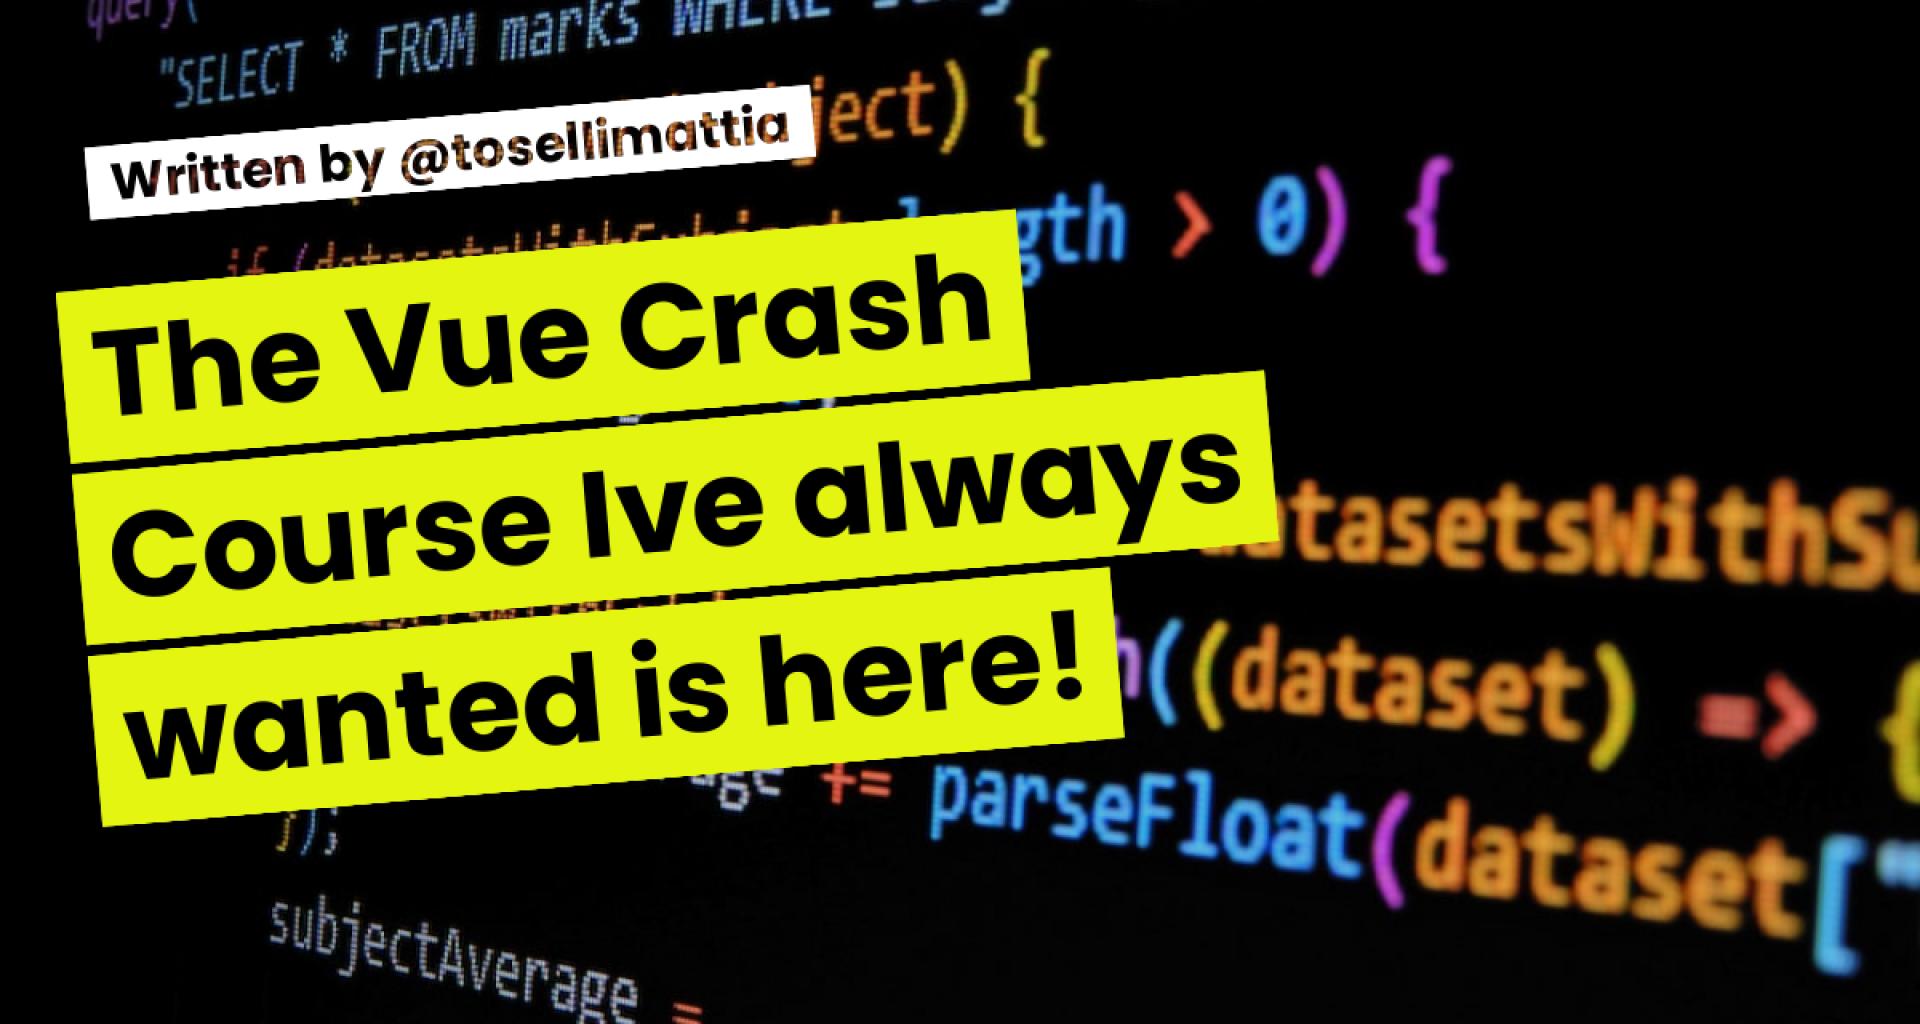 The Vue Crash Course I've always wanted is here! Part 1: The Vue Practitioner